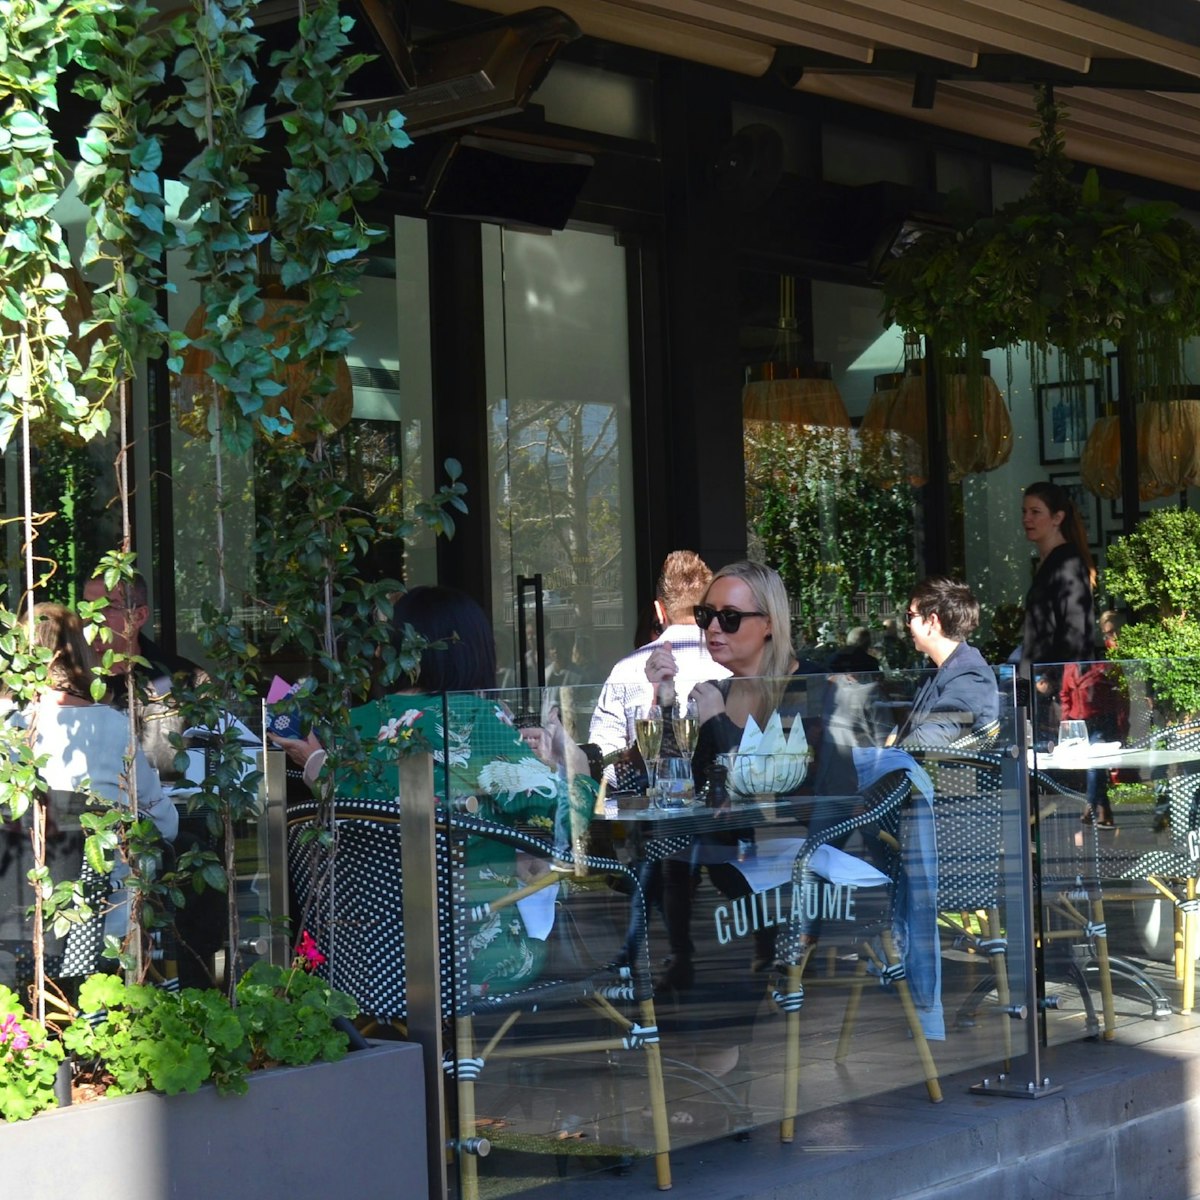 People lunching on the terrace at Bistro Guillaume, Crown.